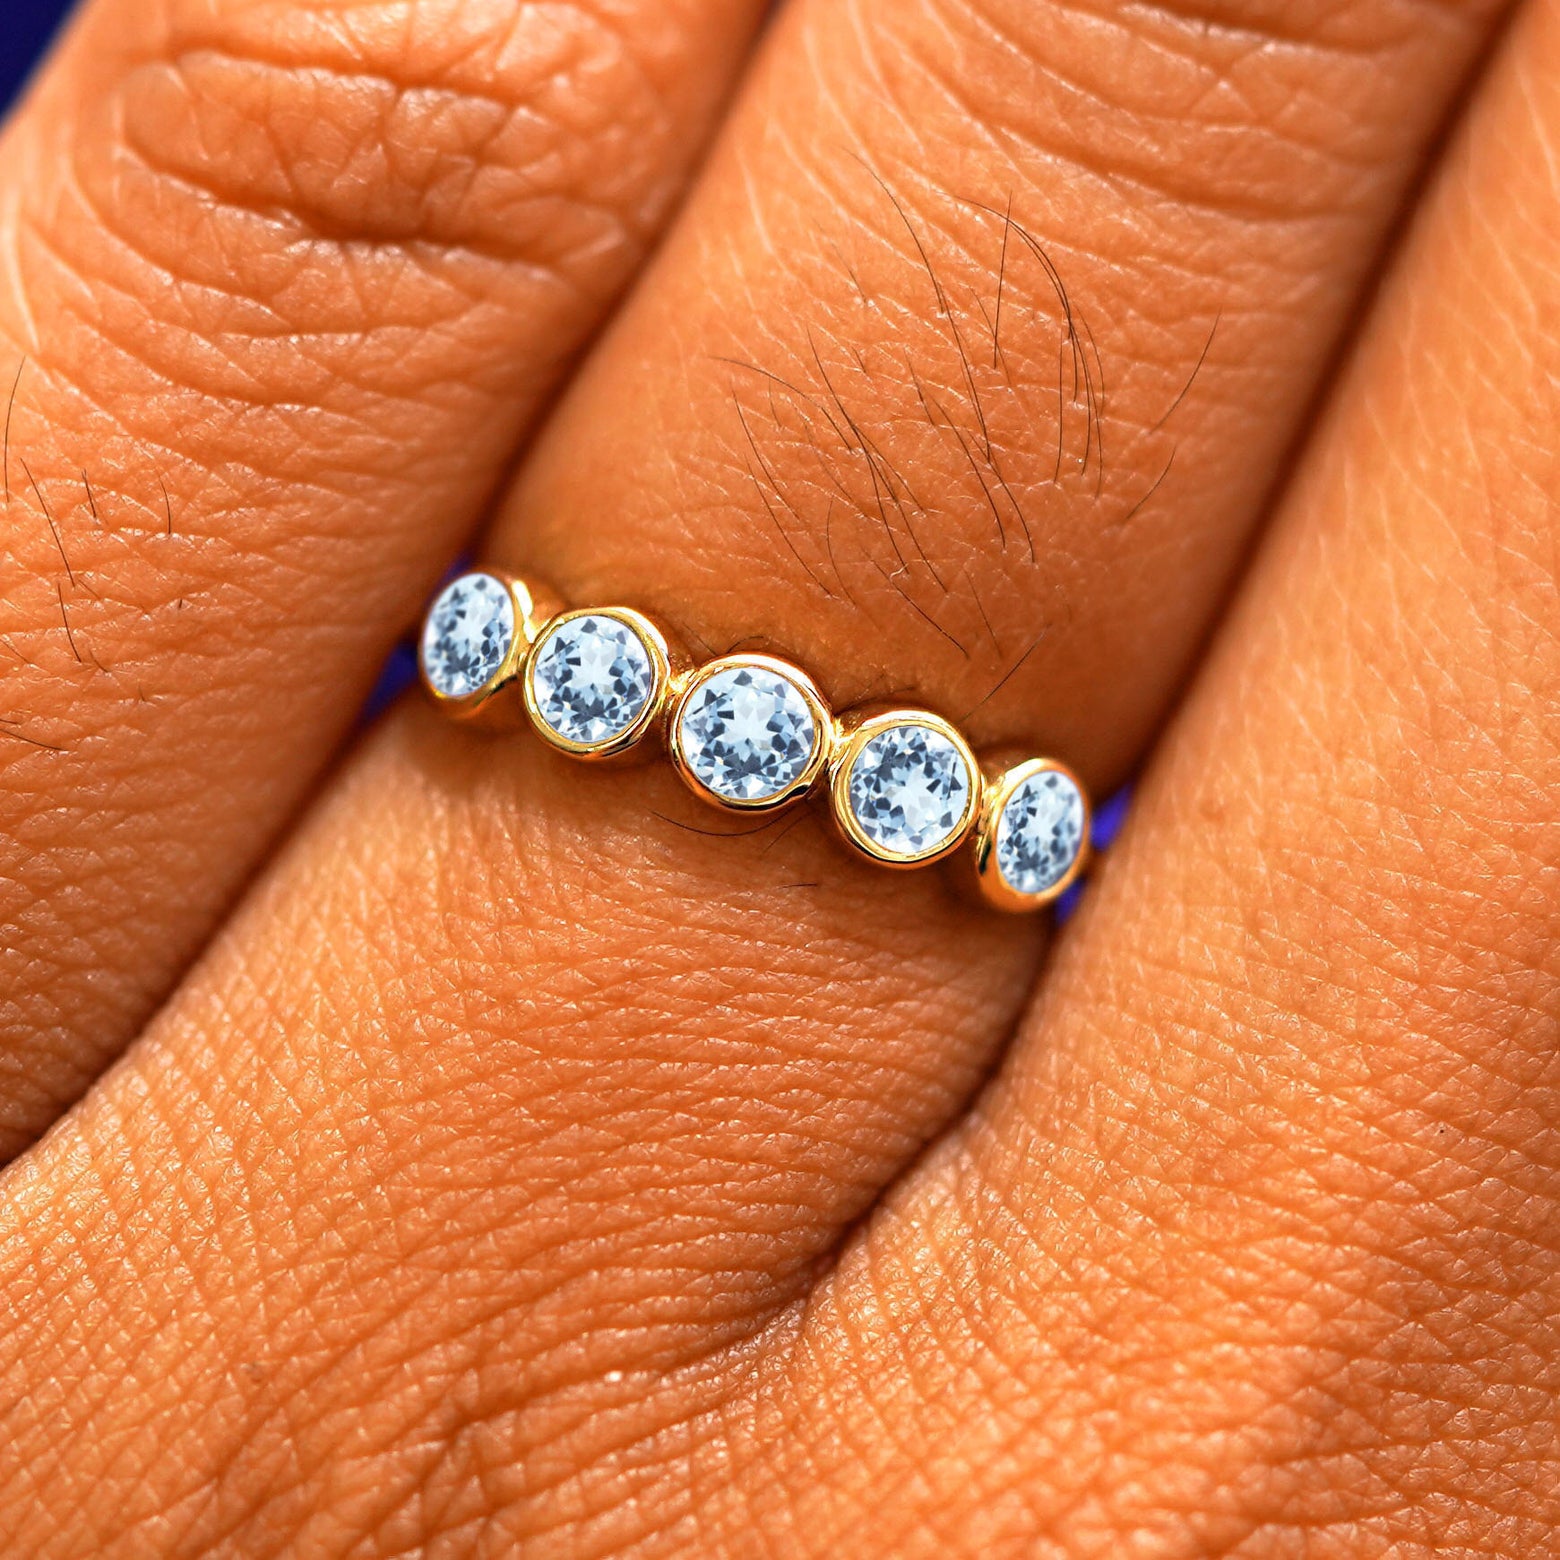 Close up view of a model's hand wearing a yellow gold 5 Gemstones Ring in aquamarine